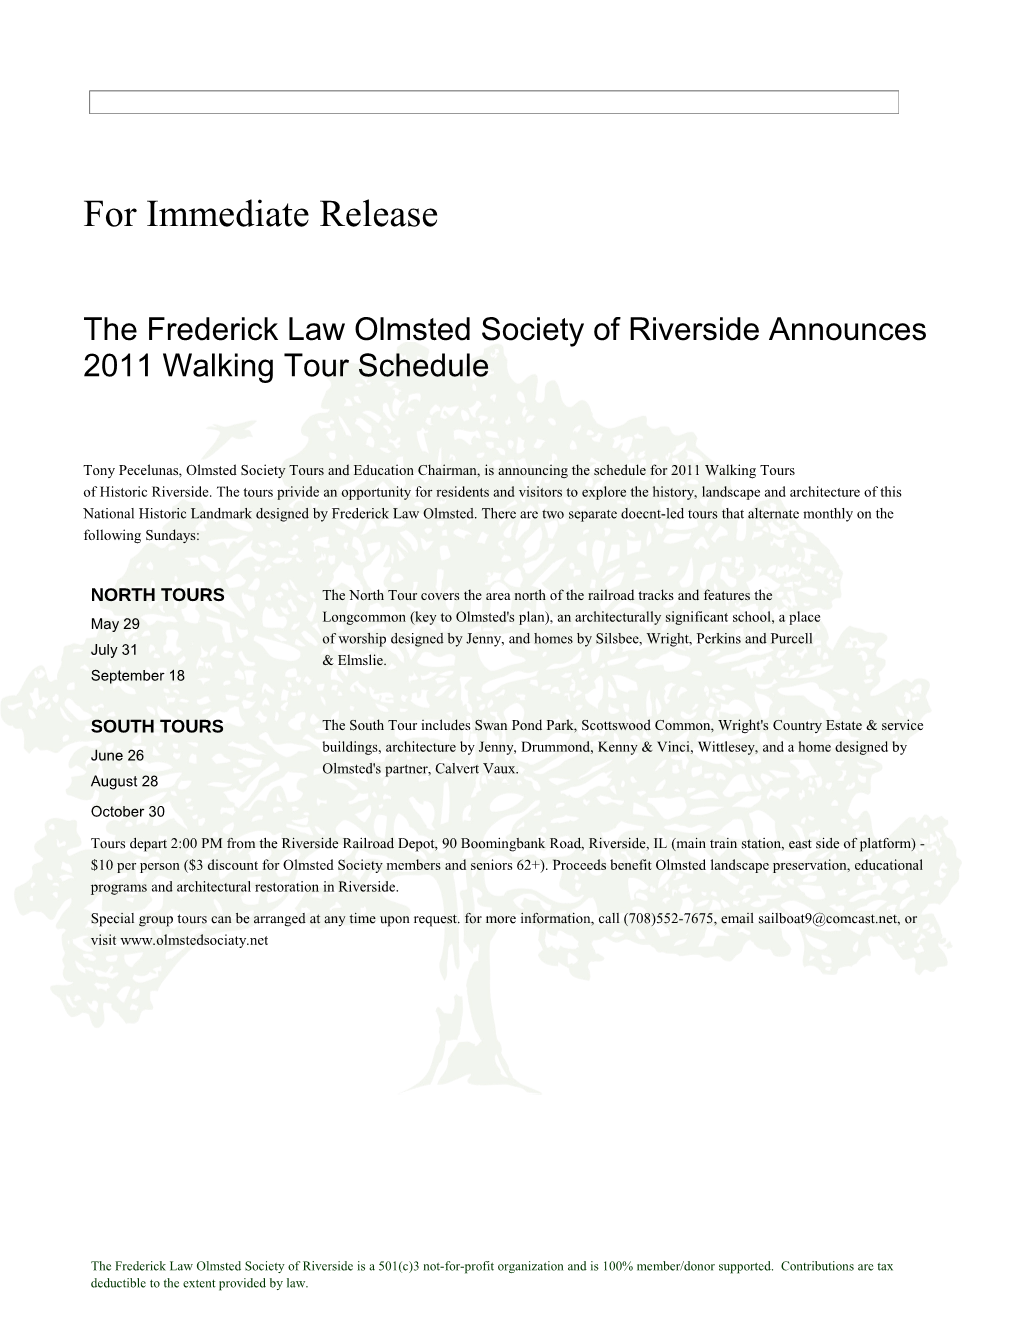 The Frederick Law Olmsted Society of Riverside Is a 501(C)3 Not-For-Profit Organization